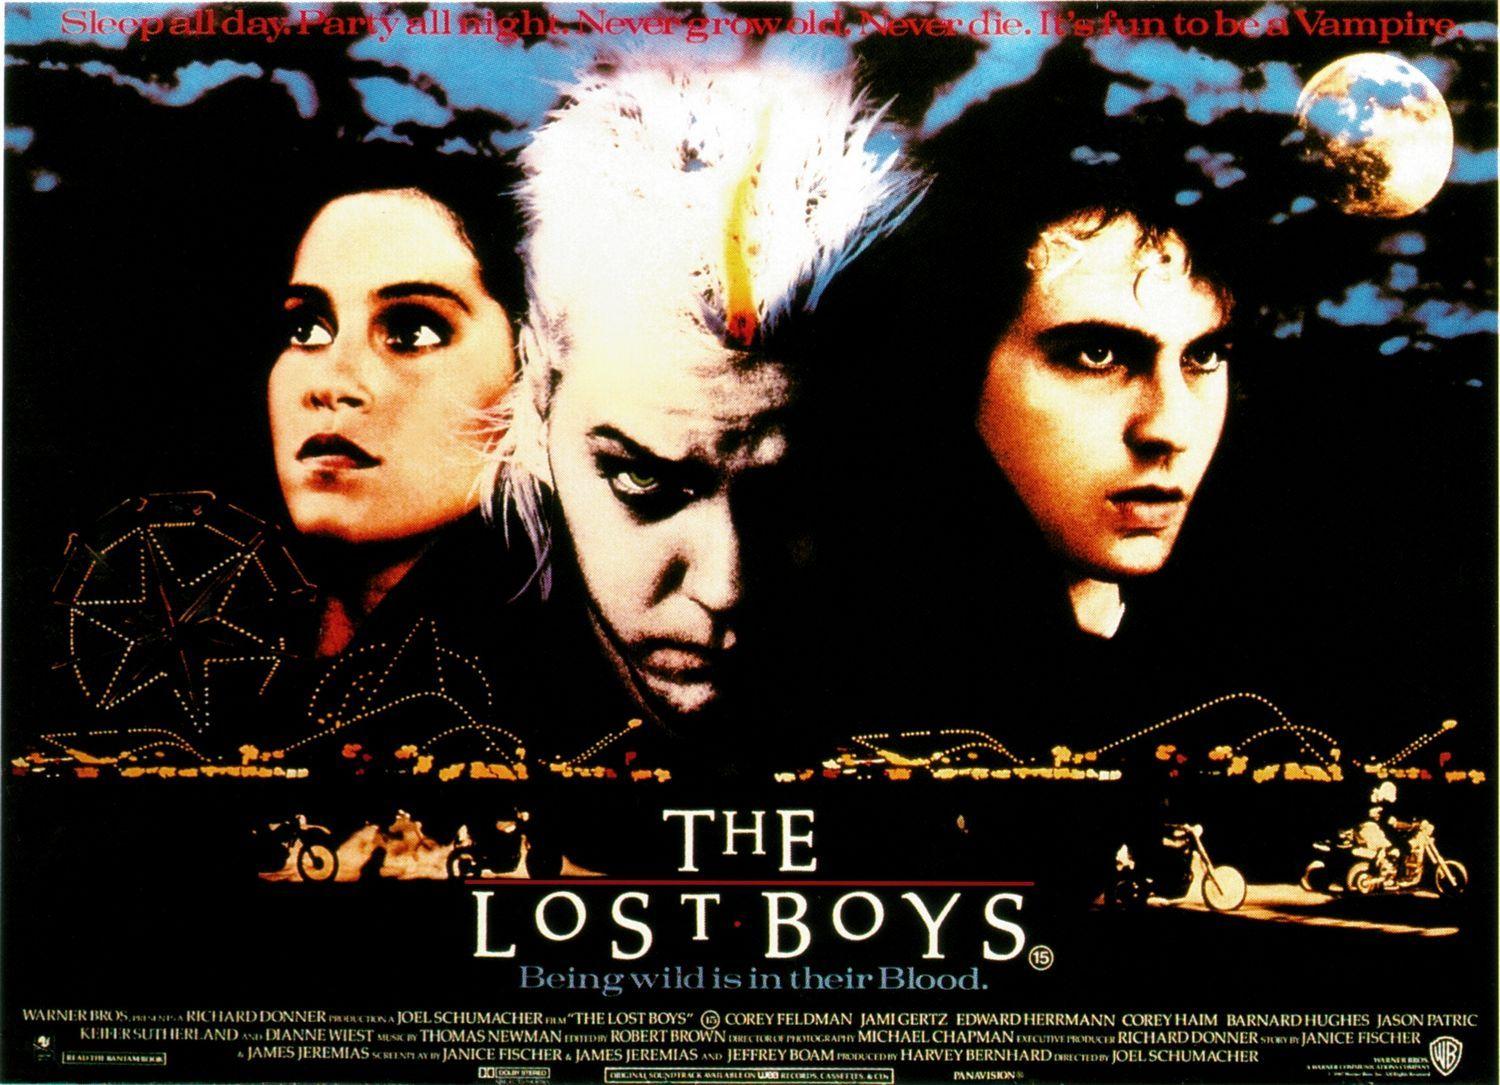 The Lost Boys Movie image download HD wallpaper and background